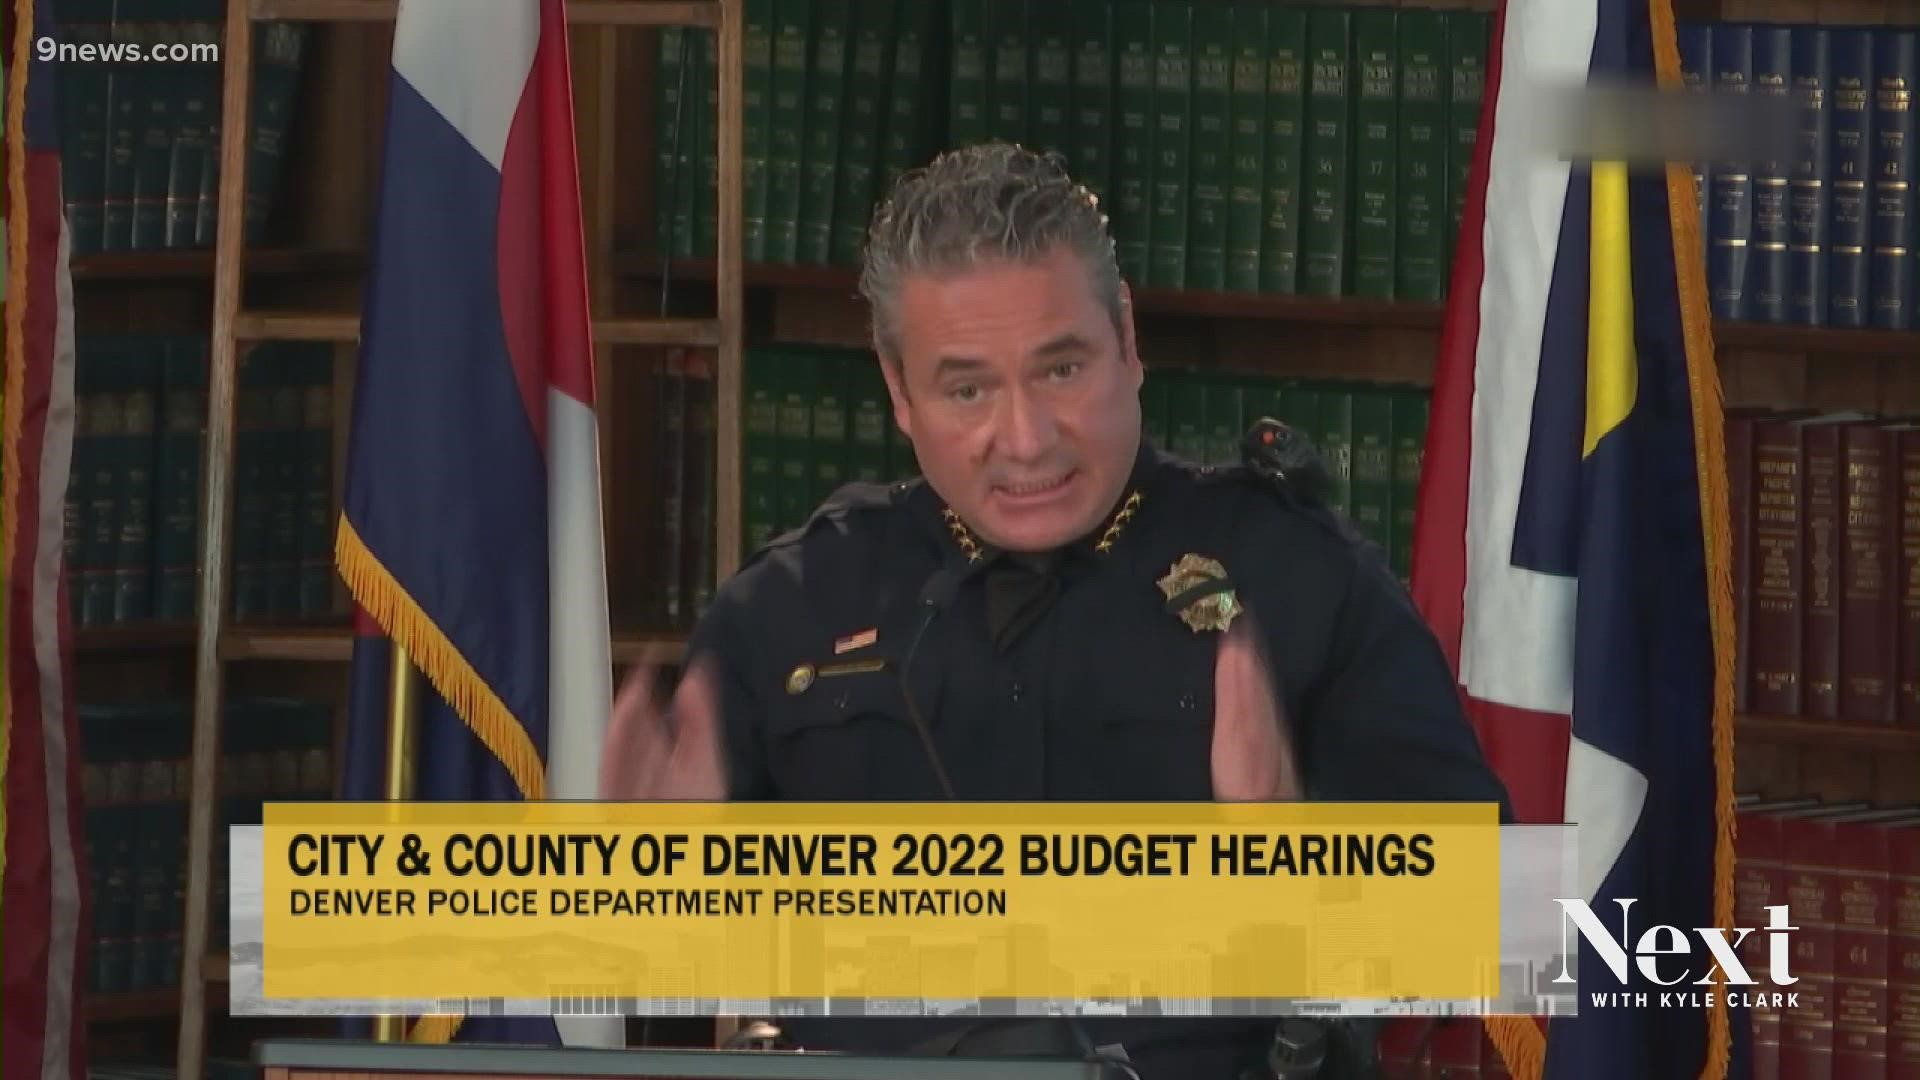 Some people speculate COVID vaccine mandates and police laws in Colorado caused officers to change jobs. Denver's chief says the economy caused the staffing issue.